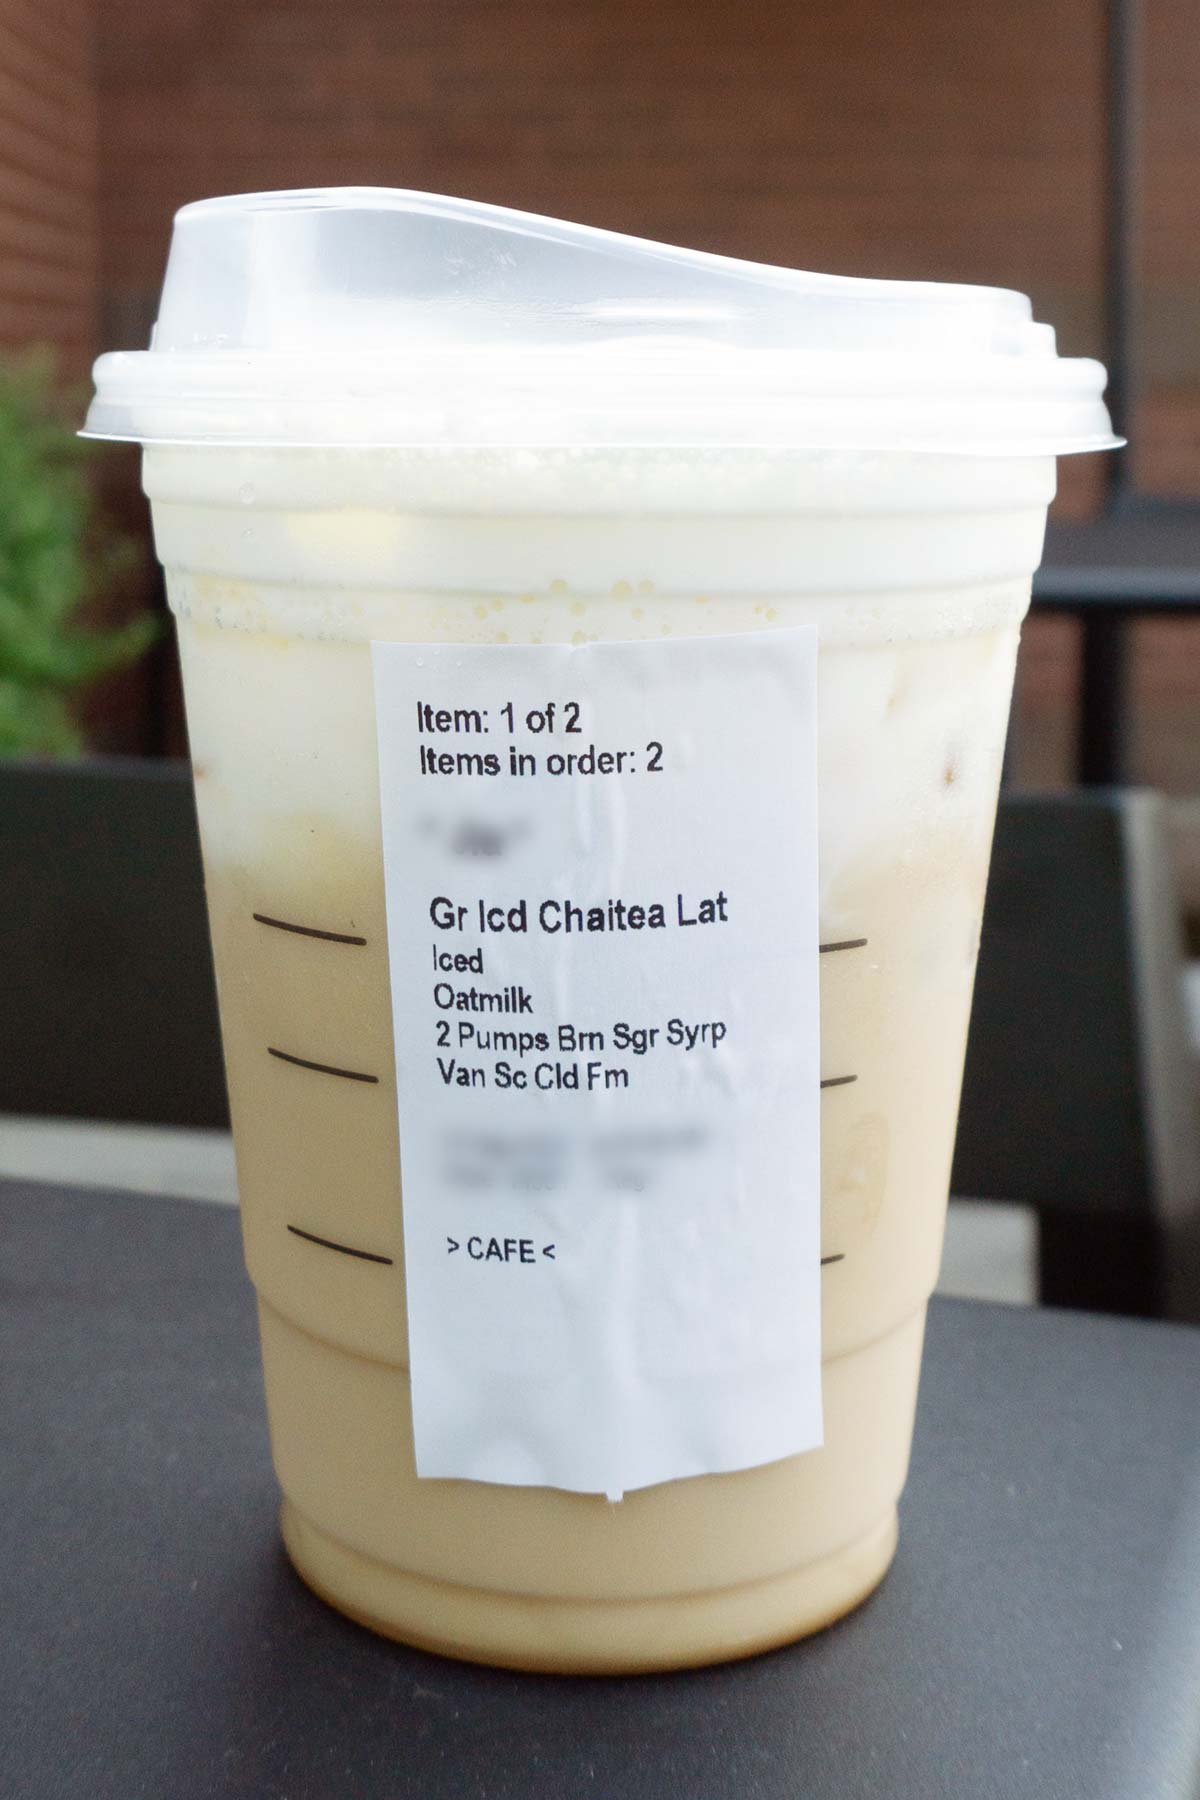 Showing label of a TikTok Iced Chai Latte drink.